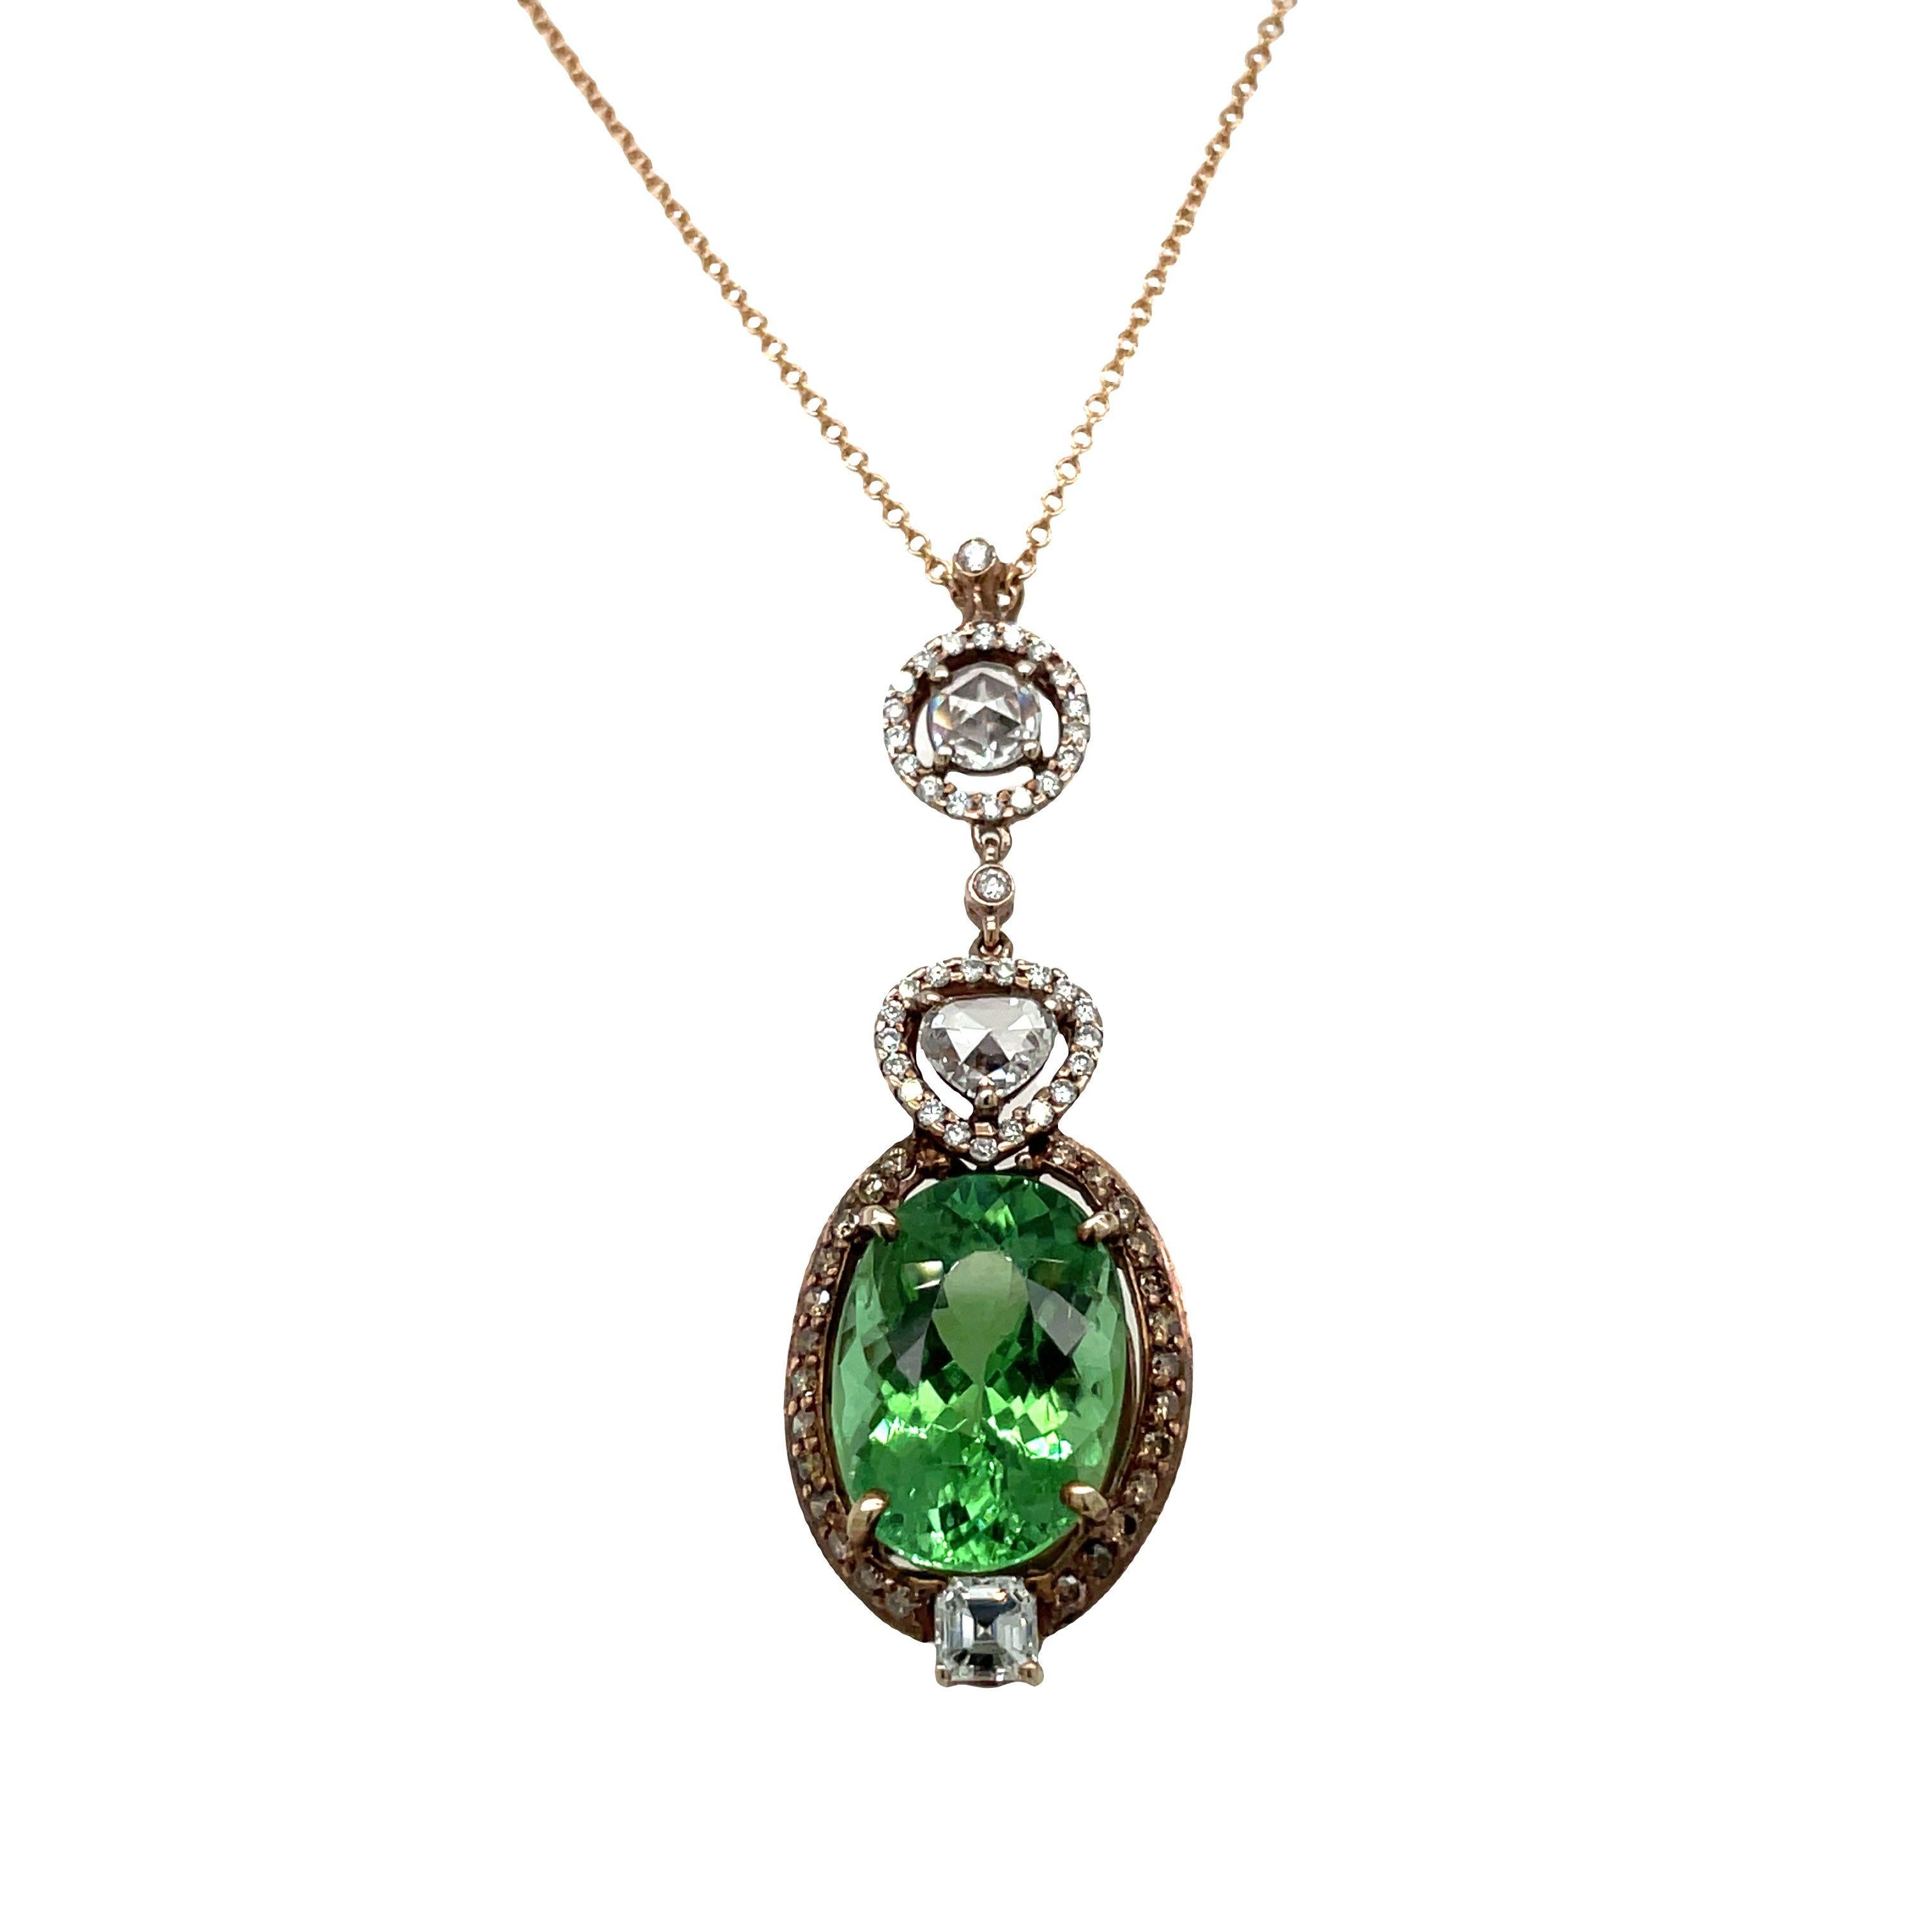 A stunning natural 9 carat Mozambique Paraiba tourmaline and diamond pendant necklace. The striking green of the tourmaline is beautifully set off in a 14 karat rose gold and old cut diamond mounting surmounted by rose cut heart and round shaped